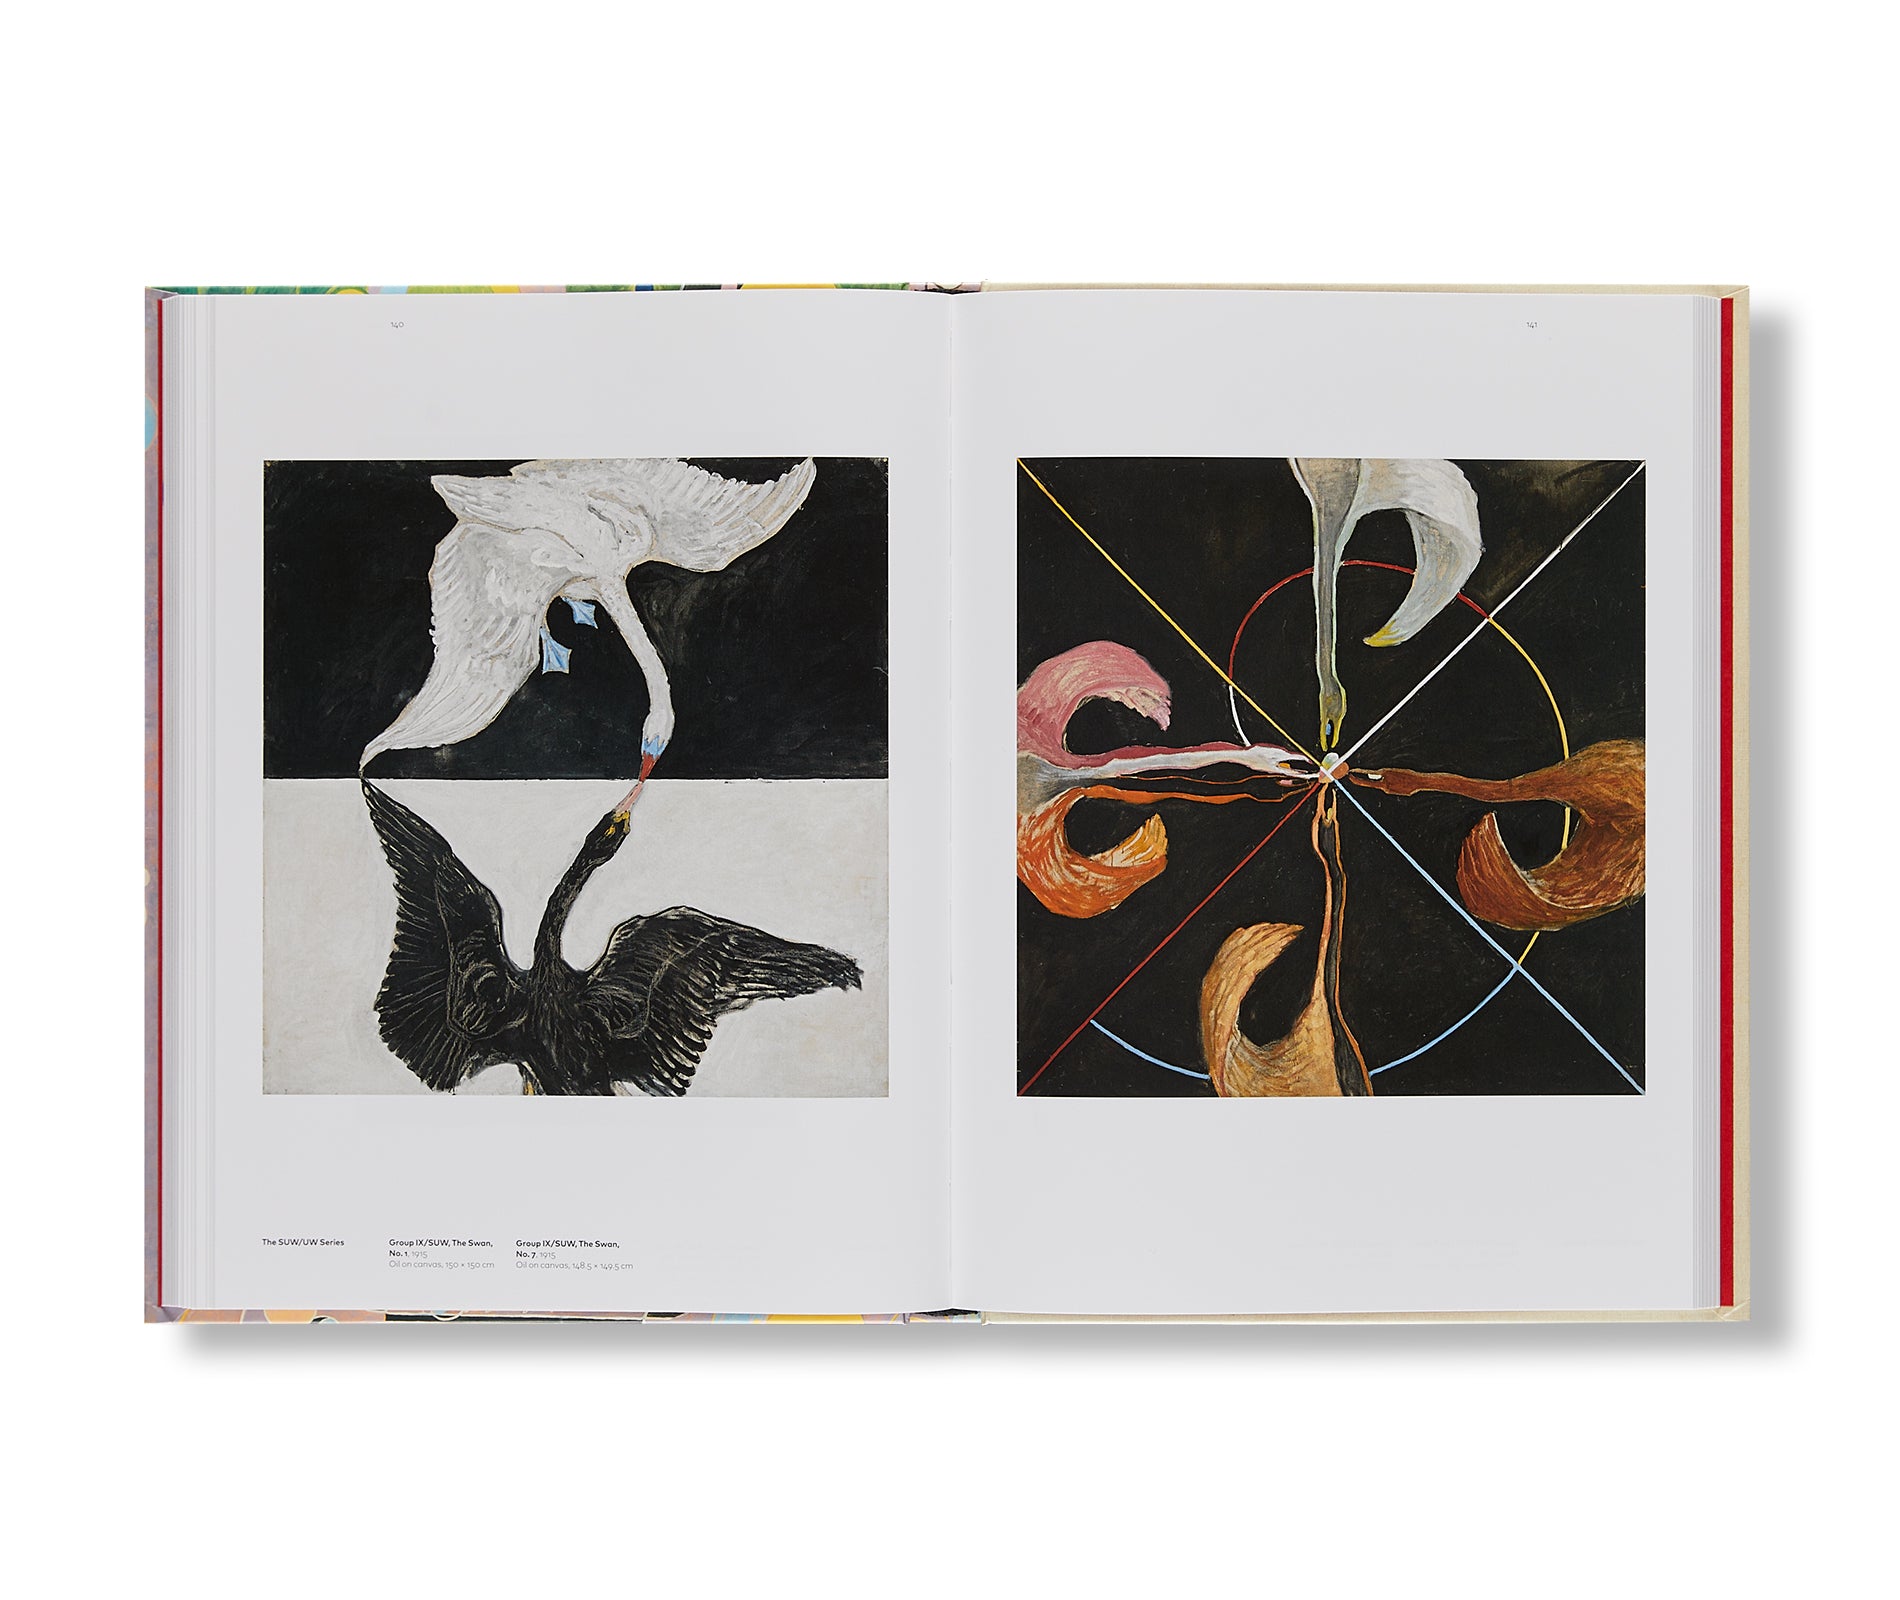 PAINTINGS FOR THE FUTURE by Hilma af Klint